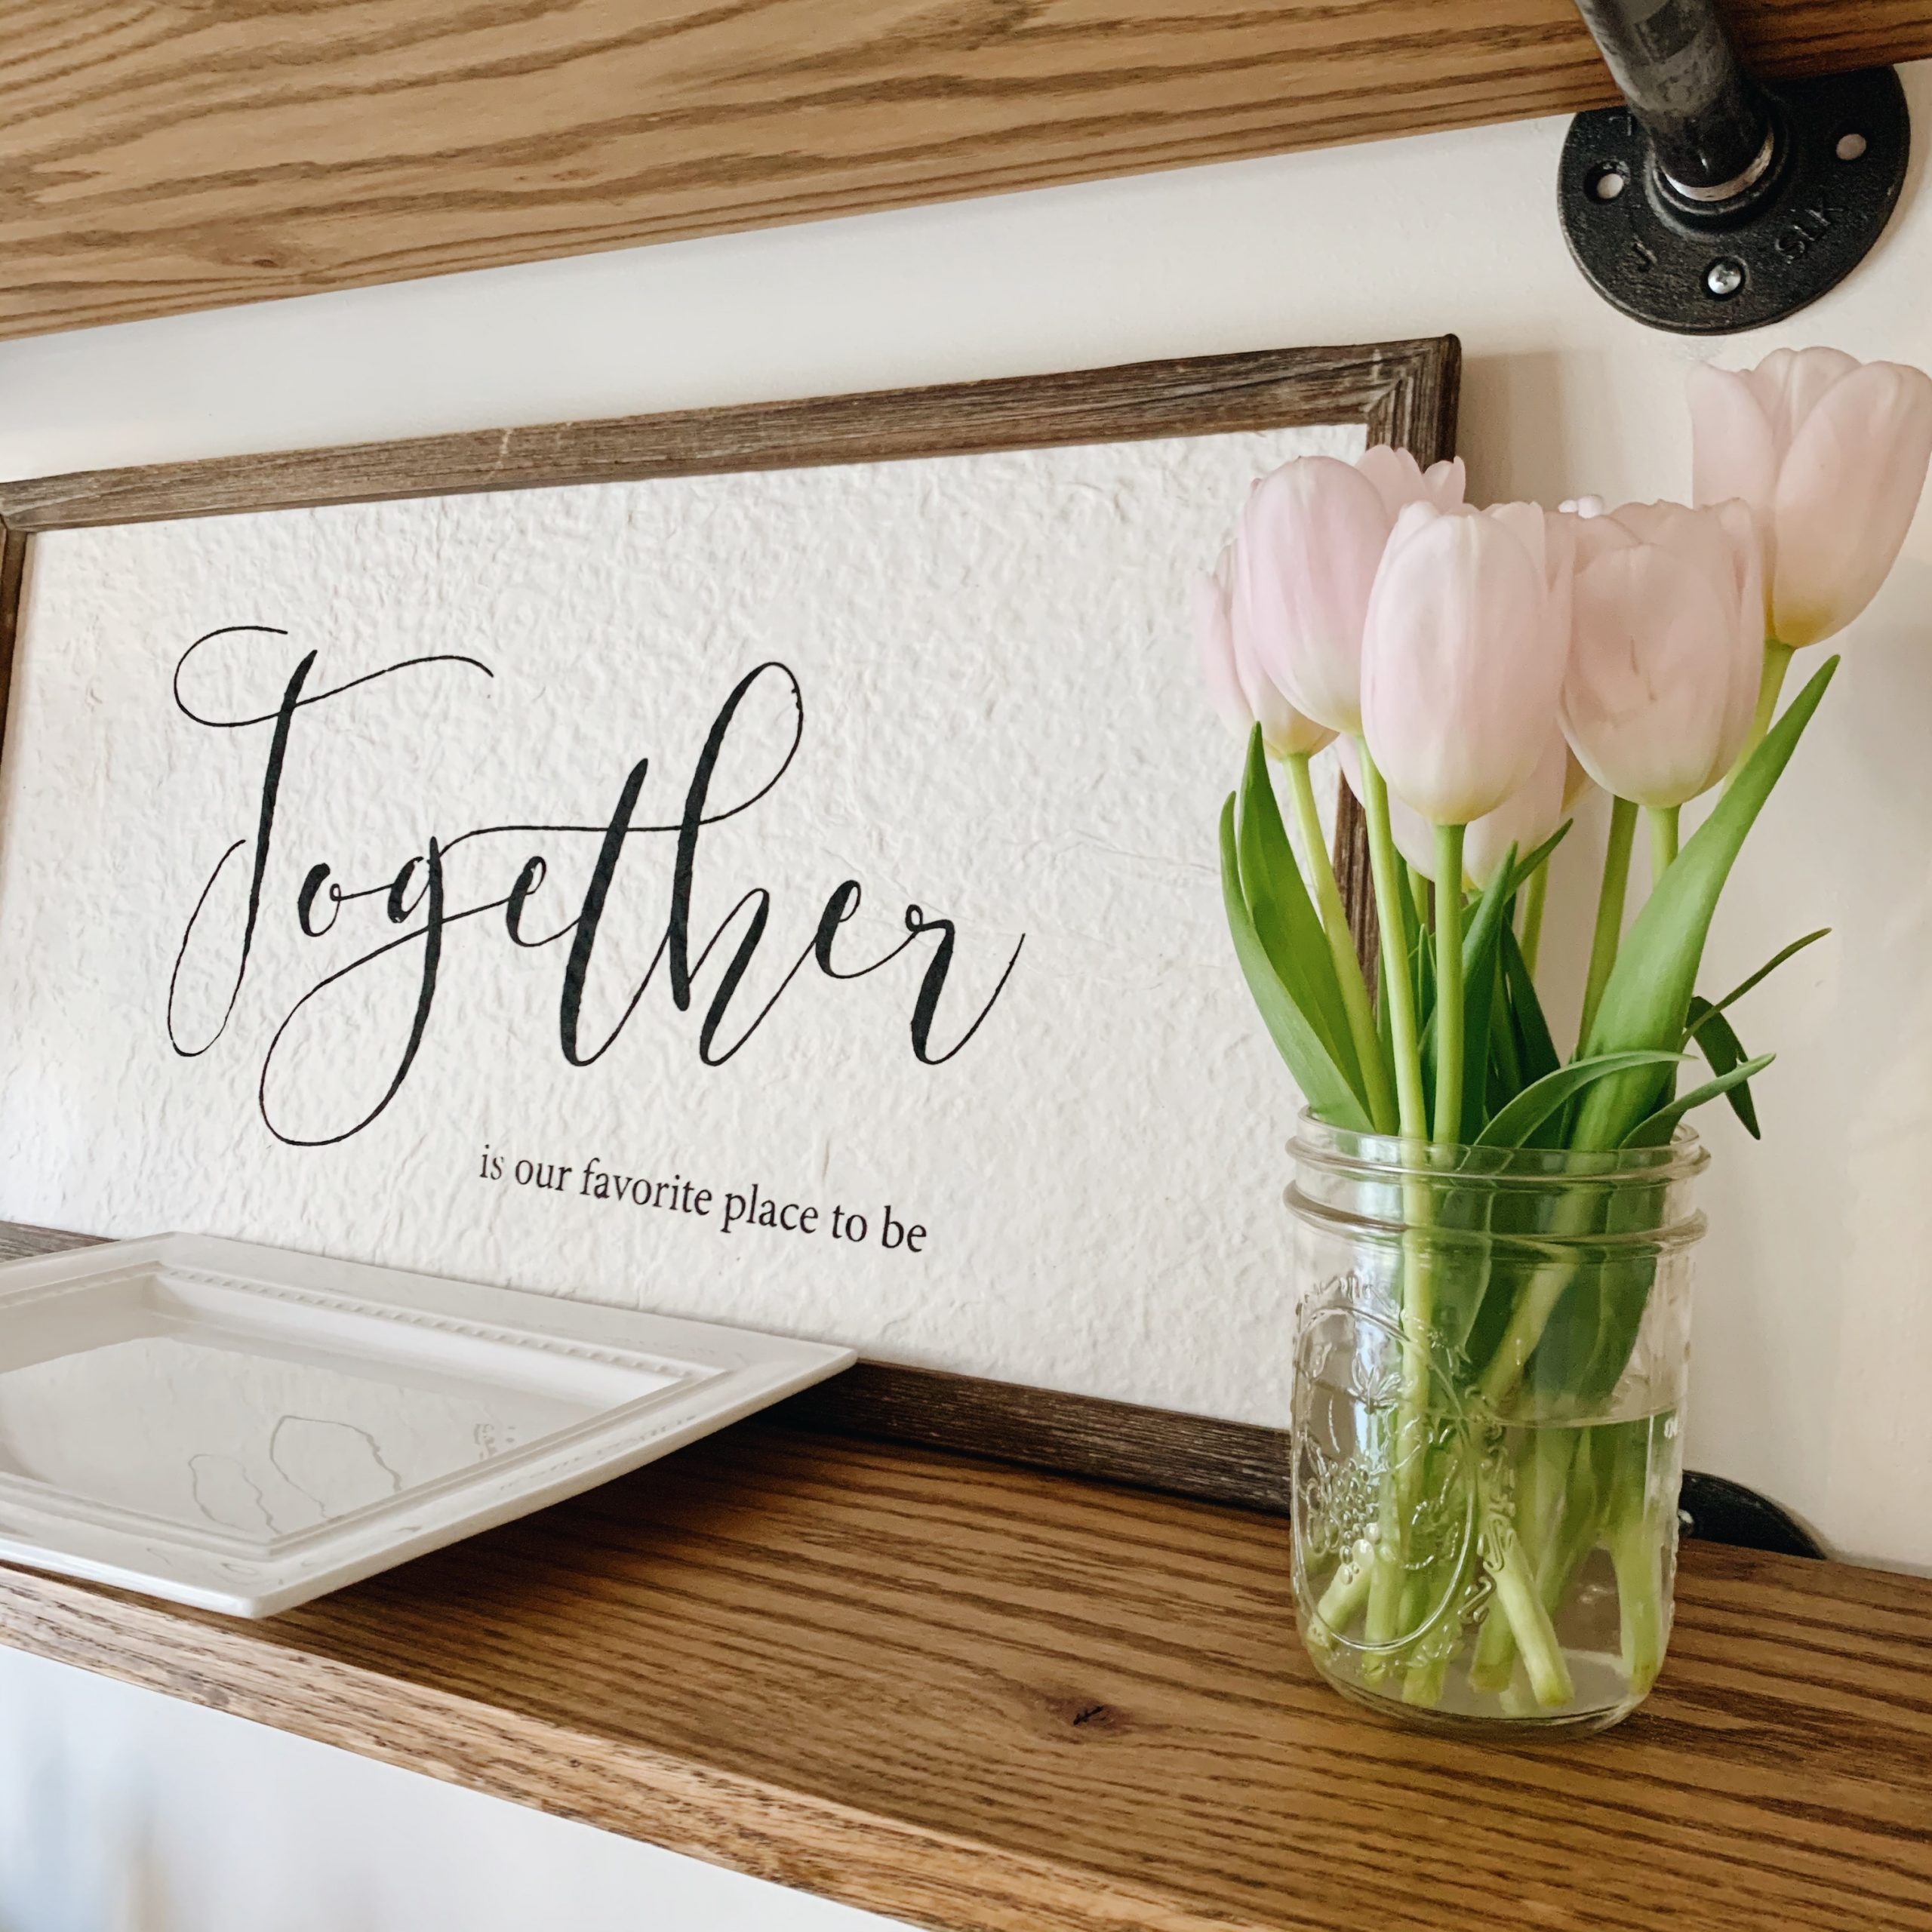 "Together is my favorite place to be" farmhouse style wooden sign on shelf | Our Little Home Style Blog